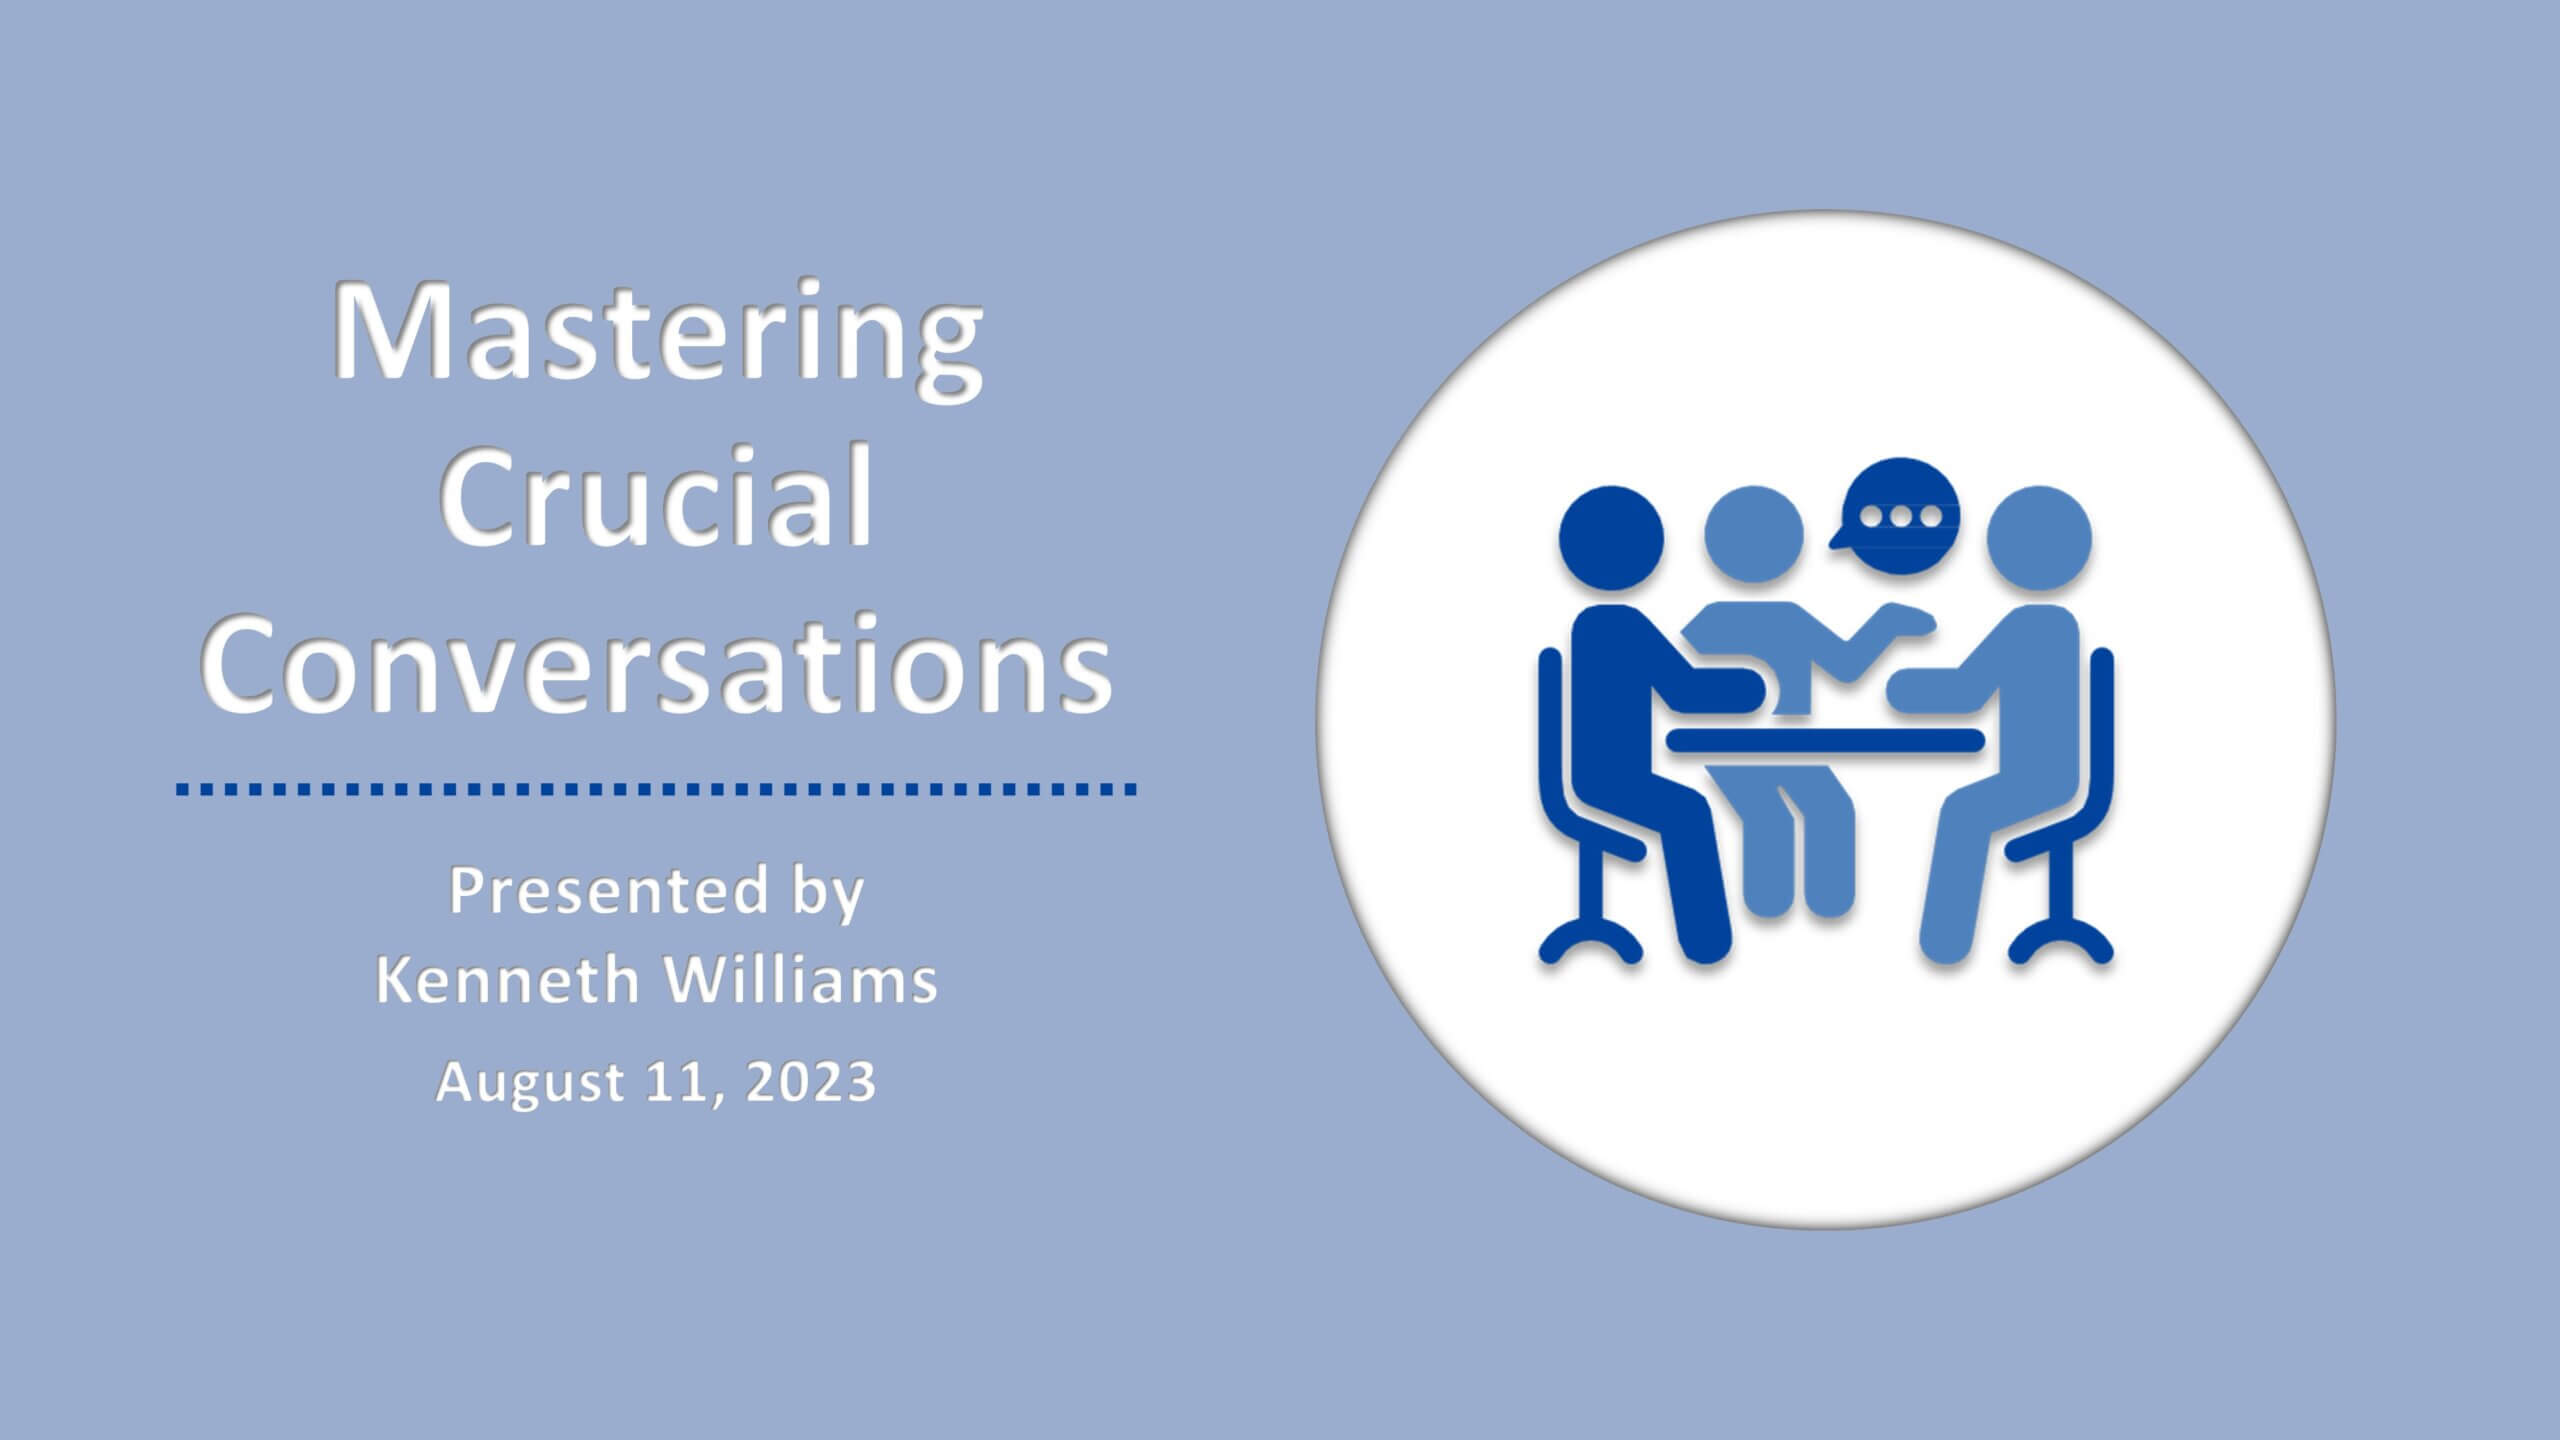 Kenneth Williams is presenting a workshop on mastering crucial conversations